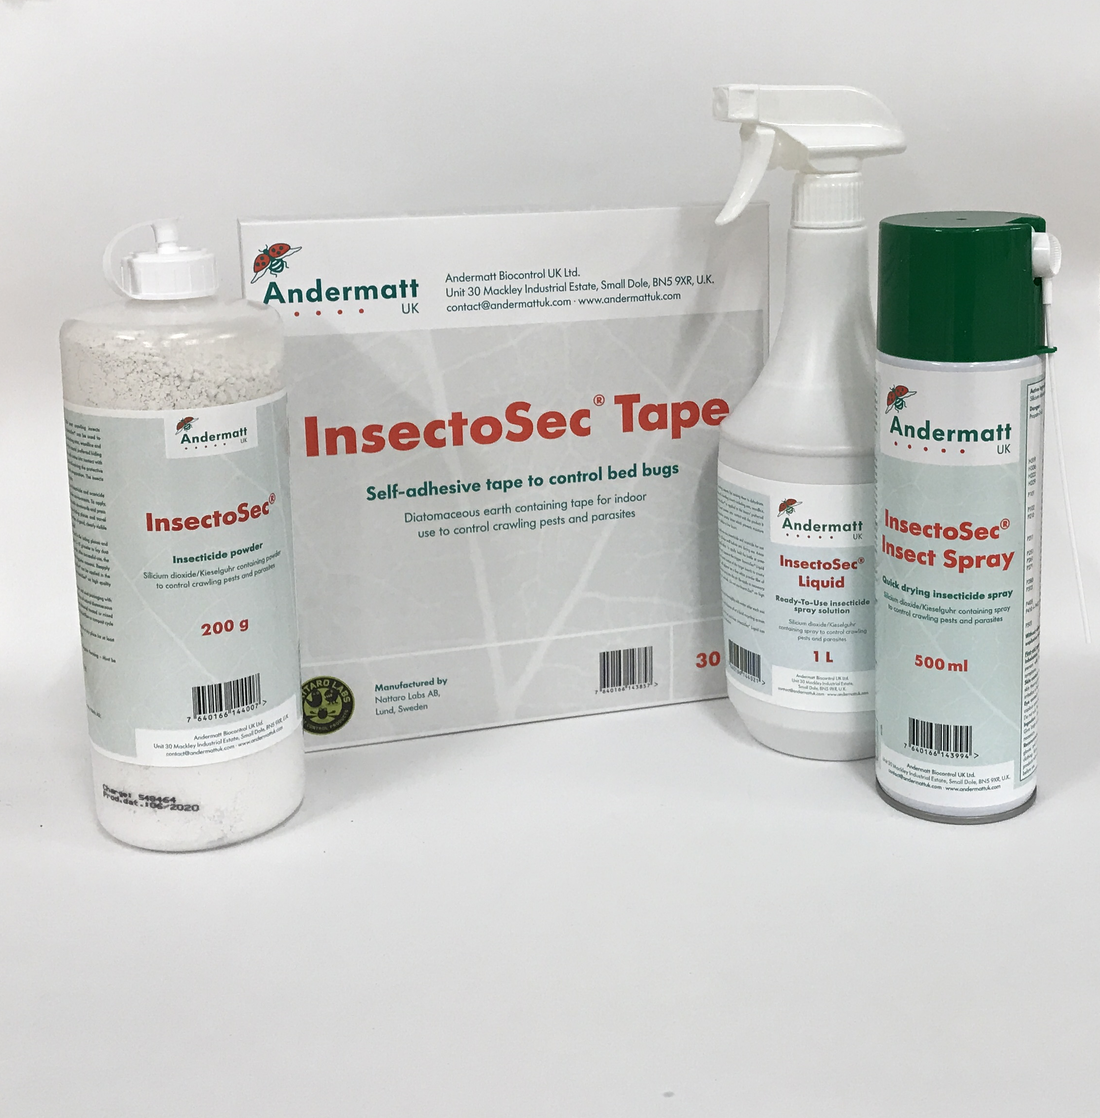 Why use Andermatt pest control products?